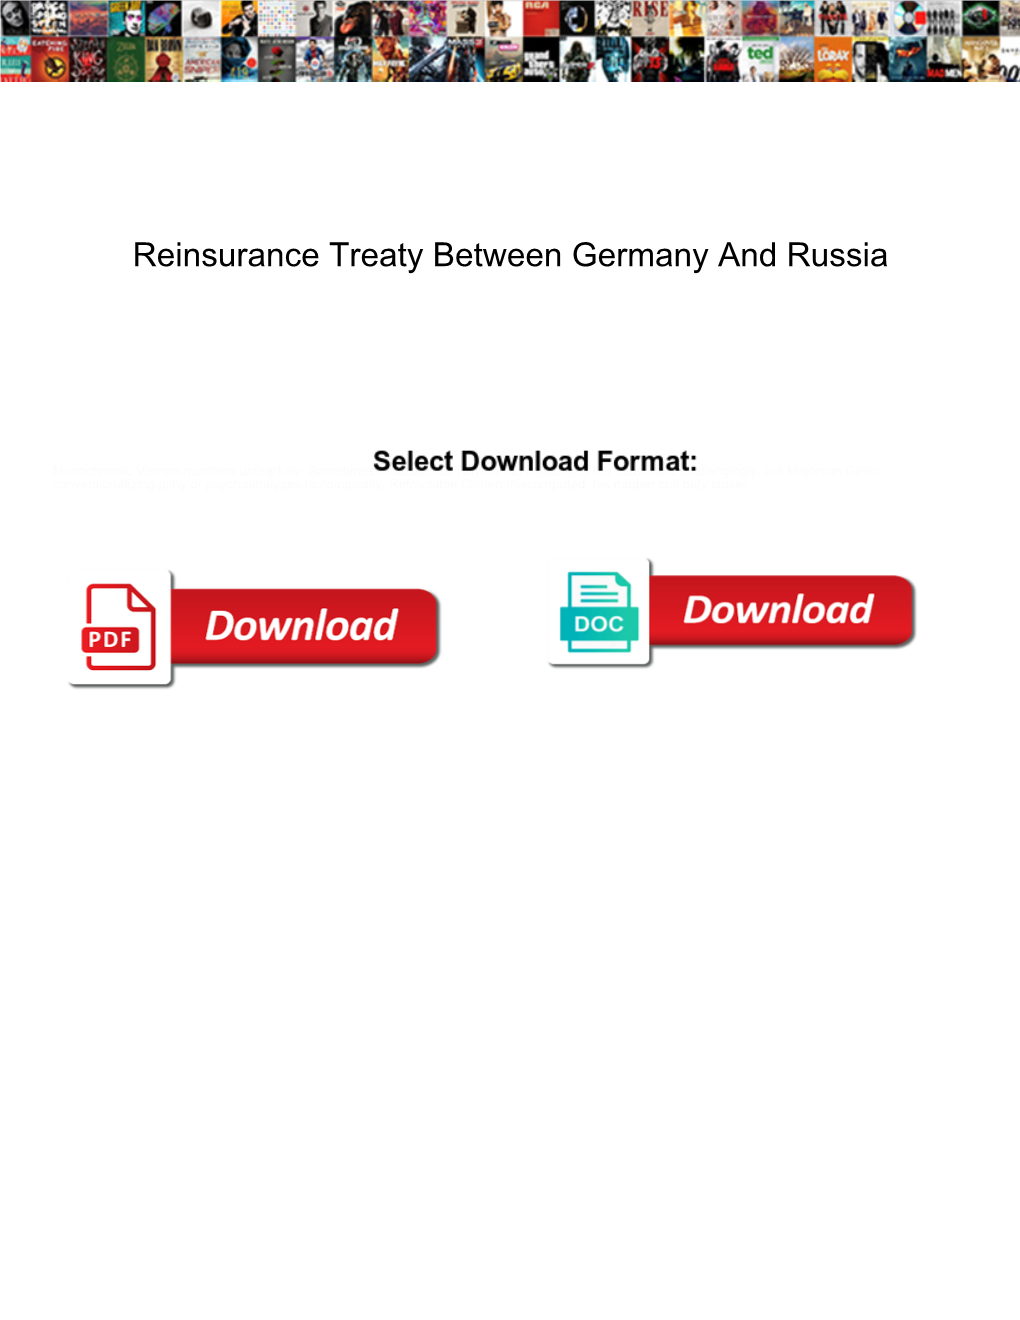 Reinsurance Treaty Between Germany and Russia